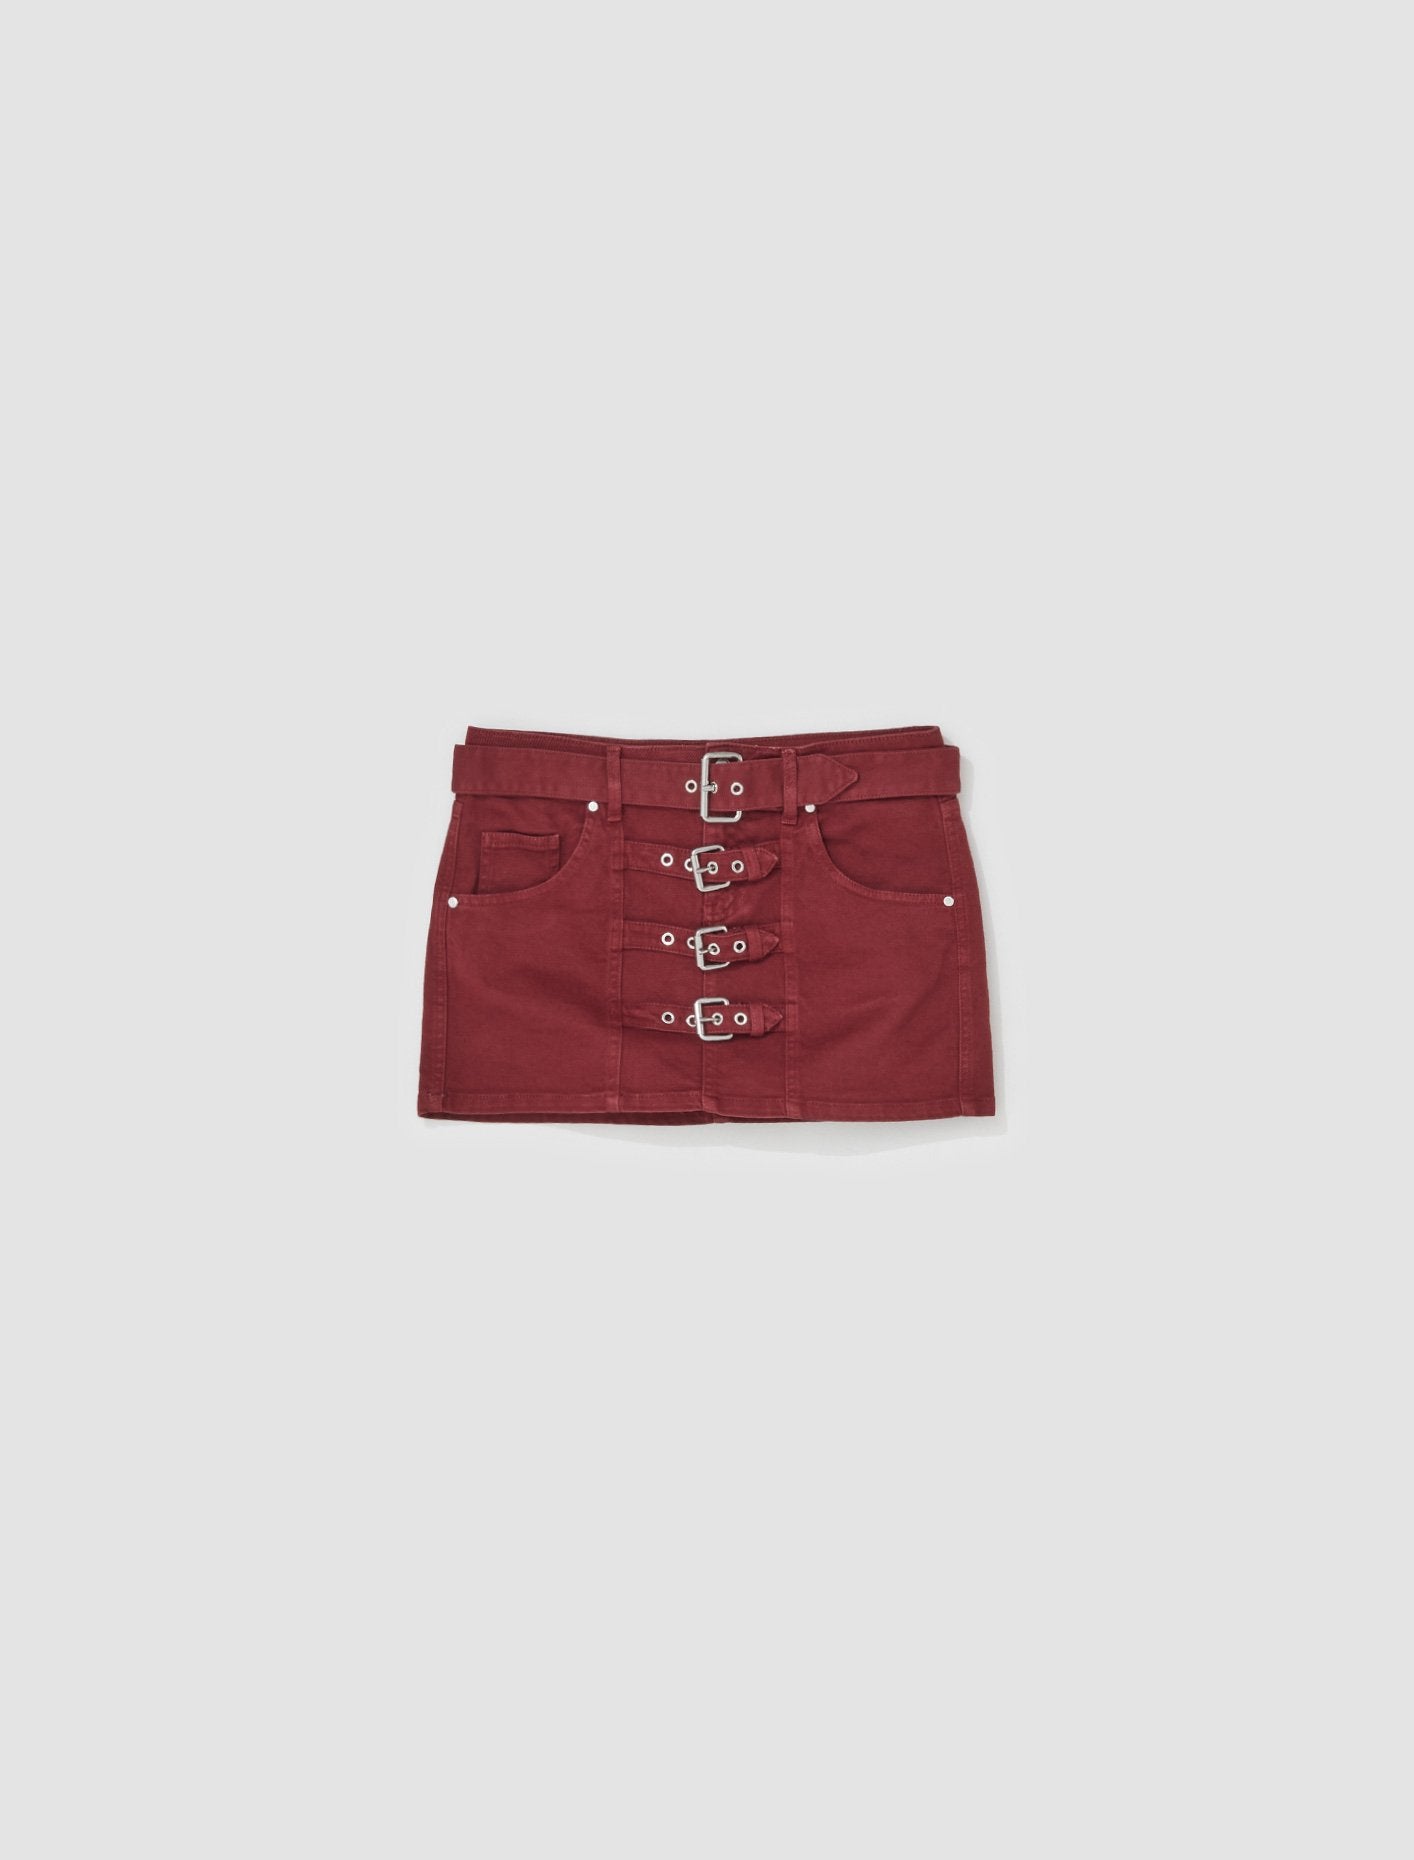 Denim Skirt With Buckle in Port Royale